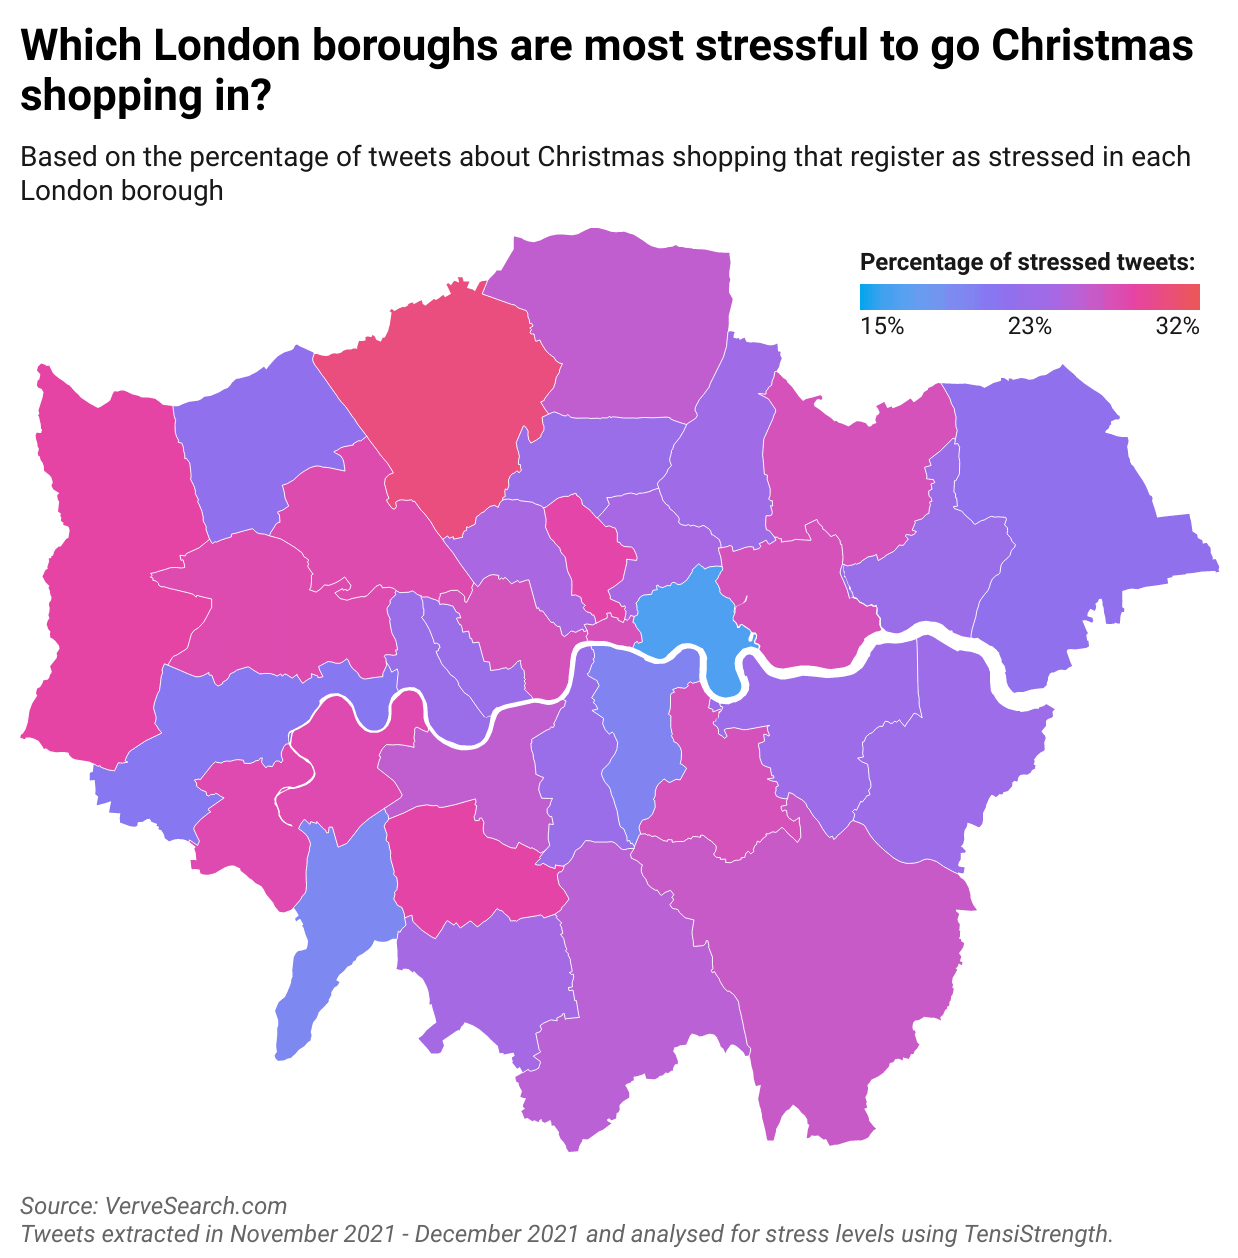 London boroughs ranked by stress for Christmas shoppers